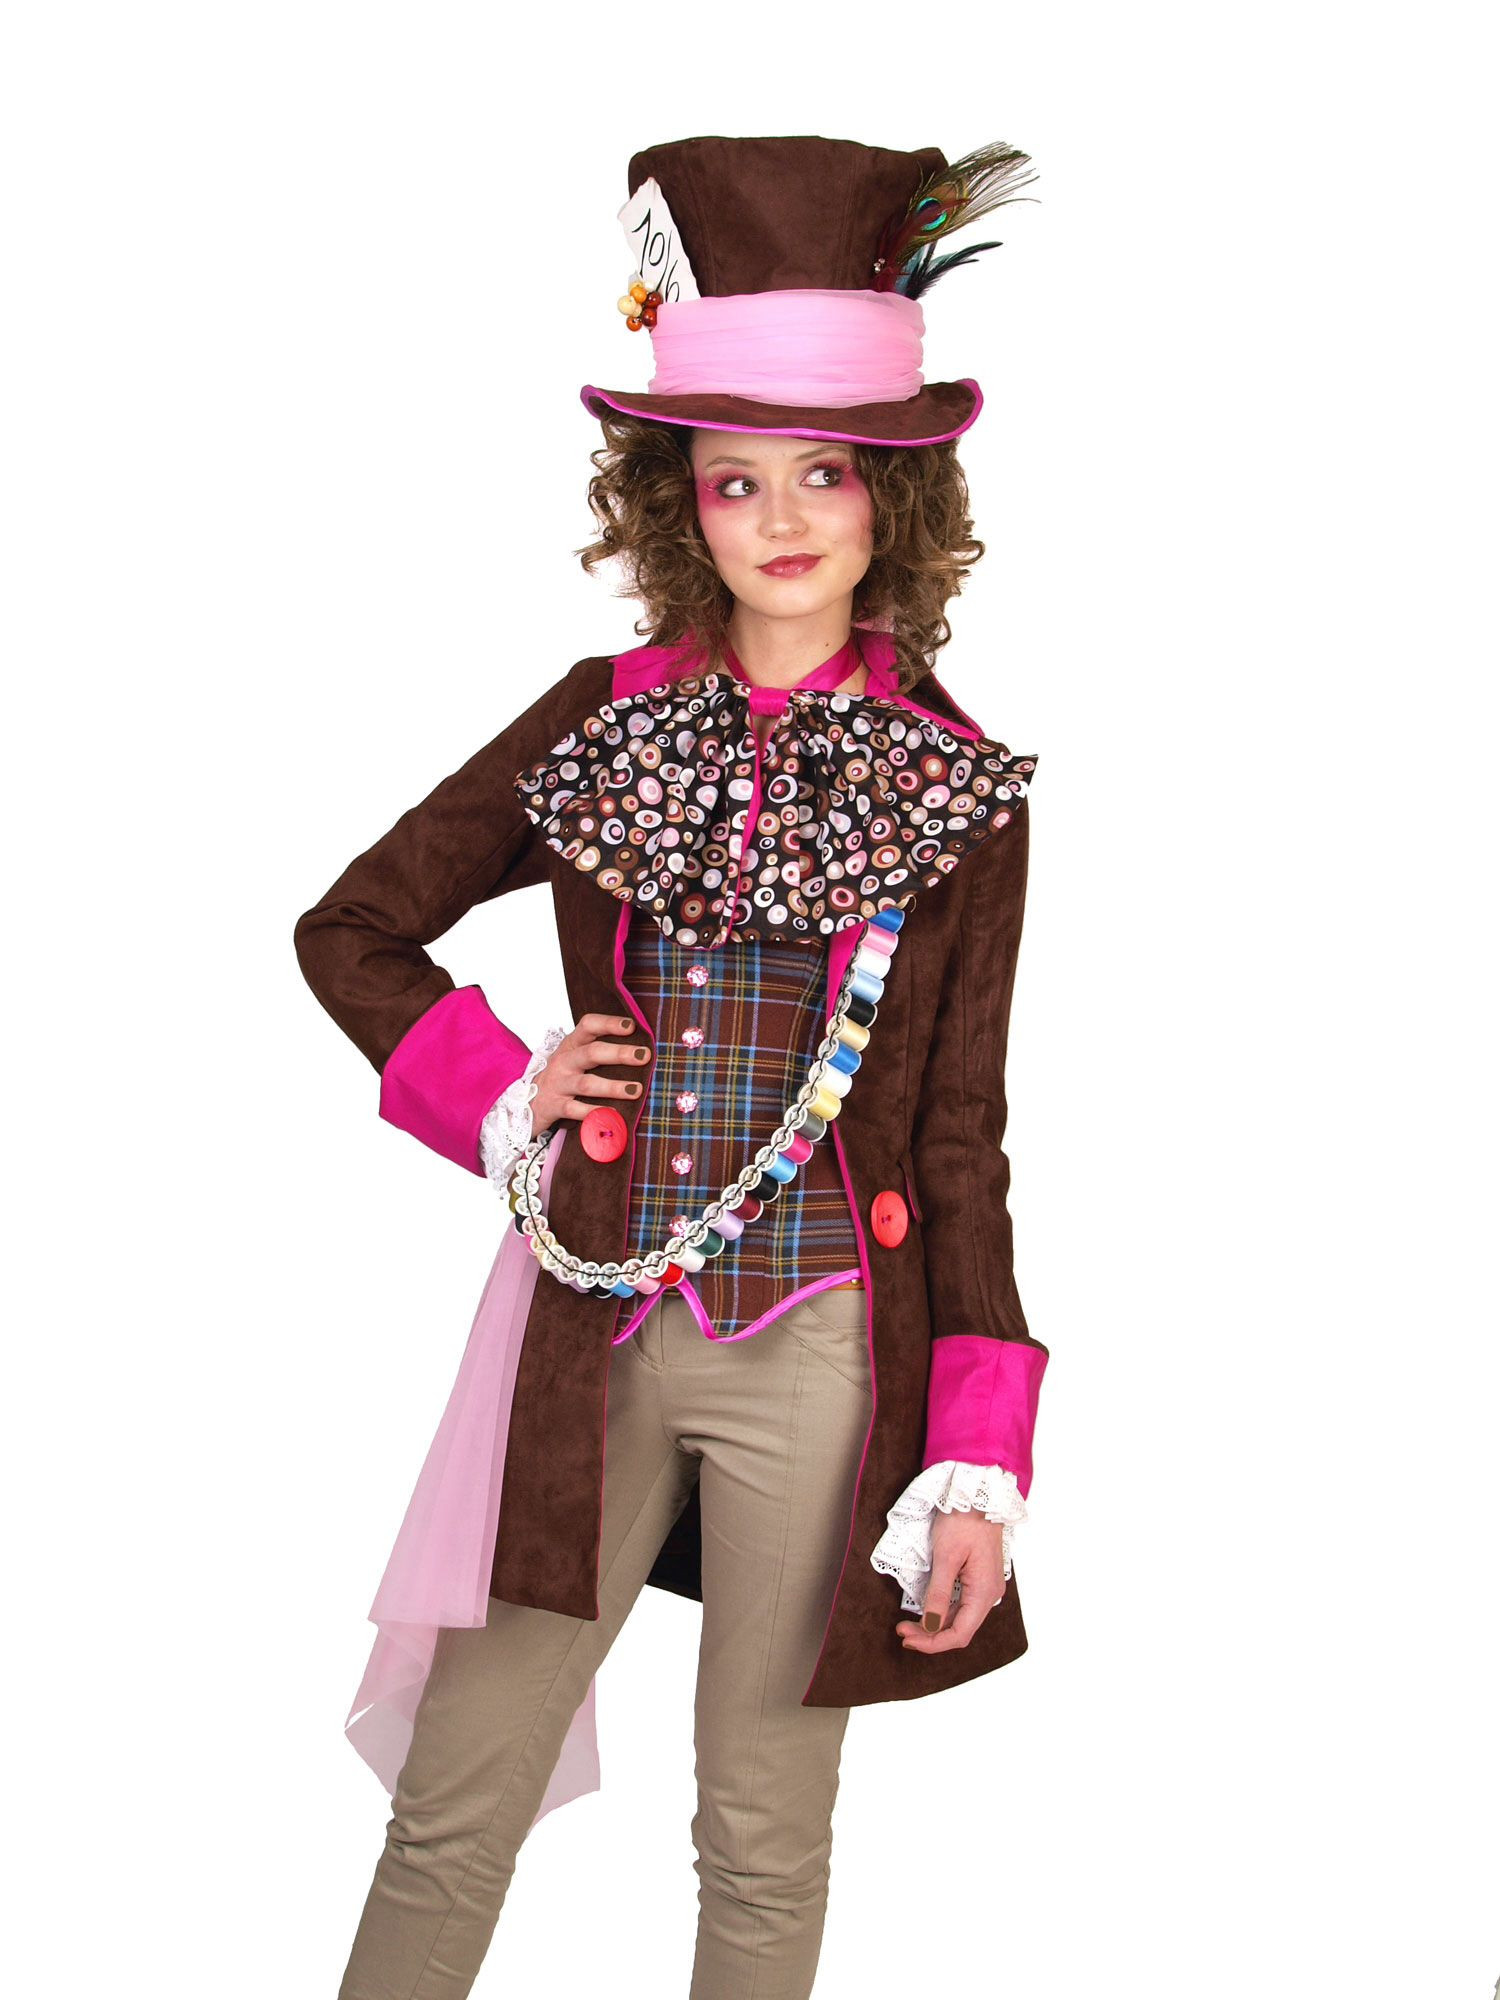 Mad Hatter Tea Party Costume Ideas
 Mad Hatter